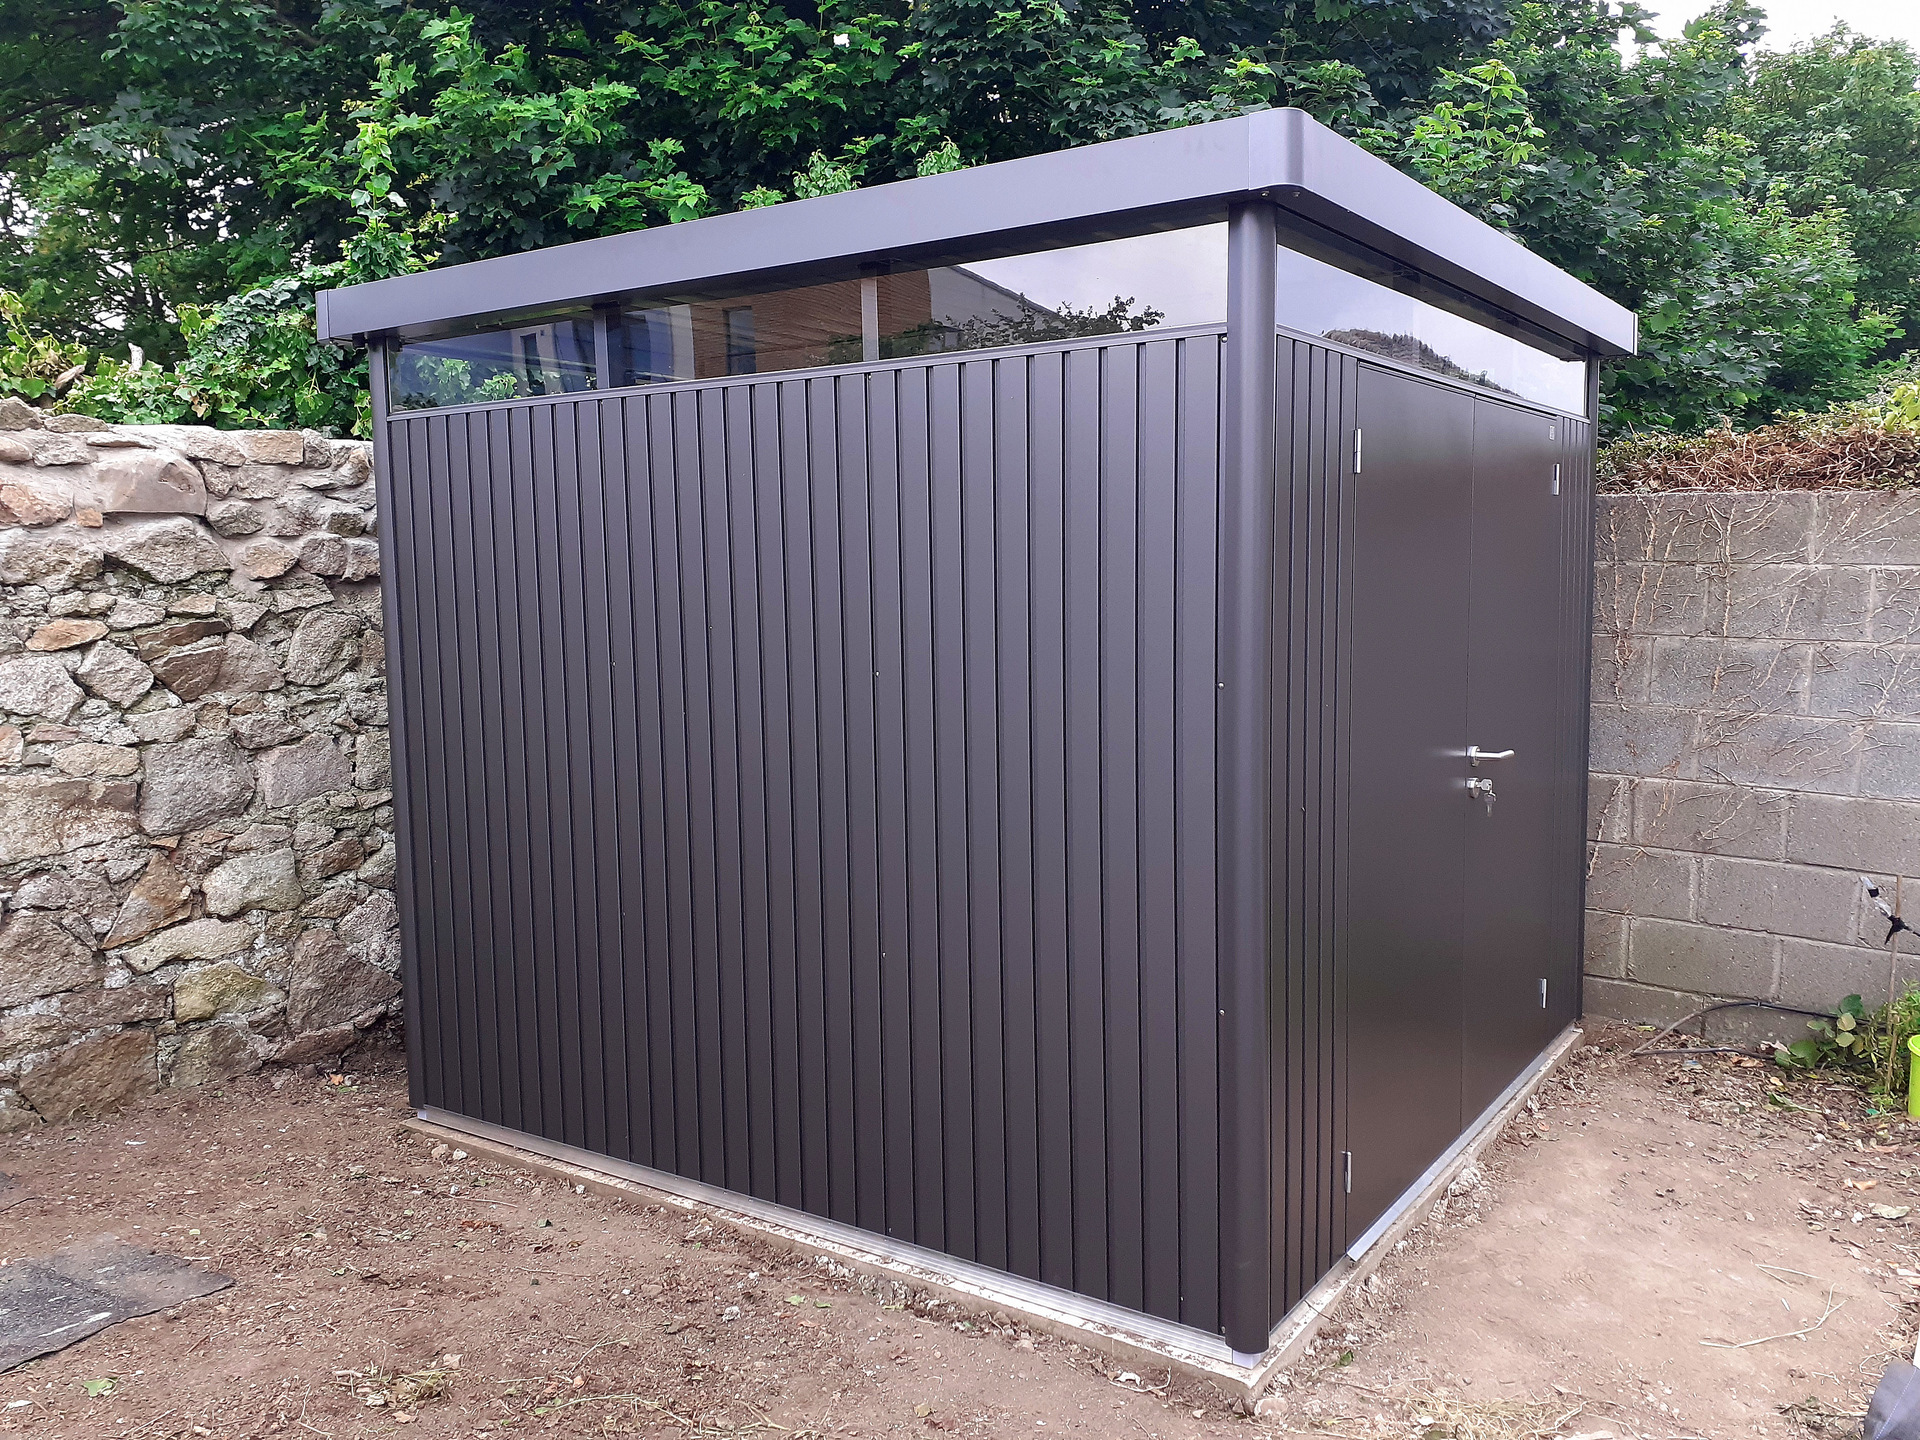 Biohort HighLine H4 Garden Shed - supplied + fitted in Goatstown, Dublin 14 | Supplied + Fitted by Owen Chubb Garden Landscapers